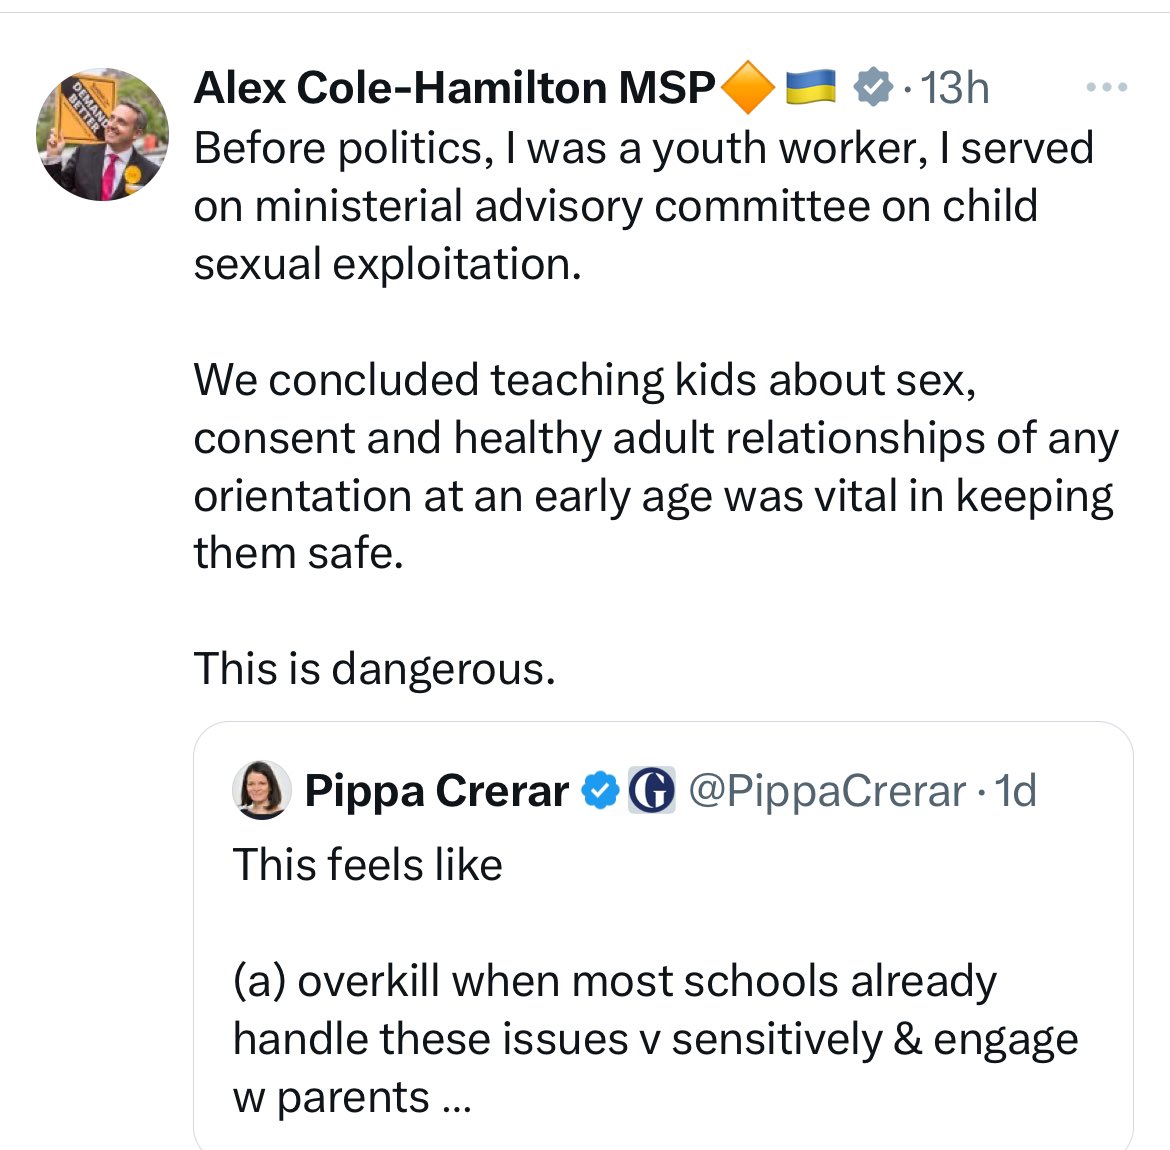 I agree with his point about sex education but WHY did ACH promise to help me when I went to him with concerns about paedophiles in Lib Dems, but then he blocked me when I reminded him of his promise? All kids deserve to be safe, including those who meet Lib Dem members. #AskAlex